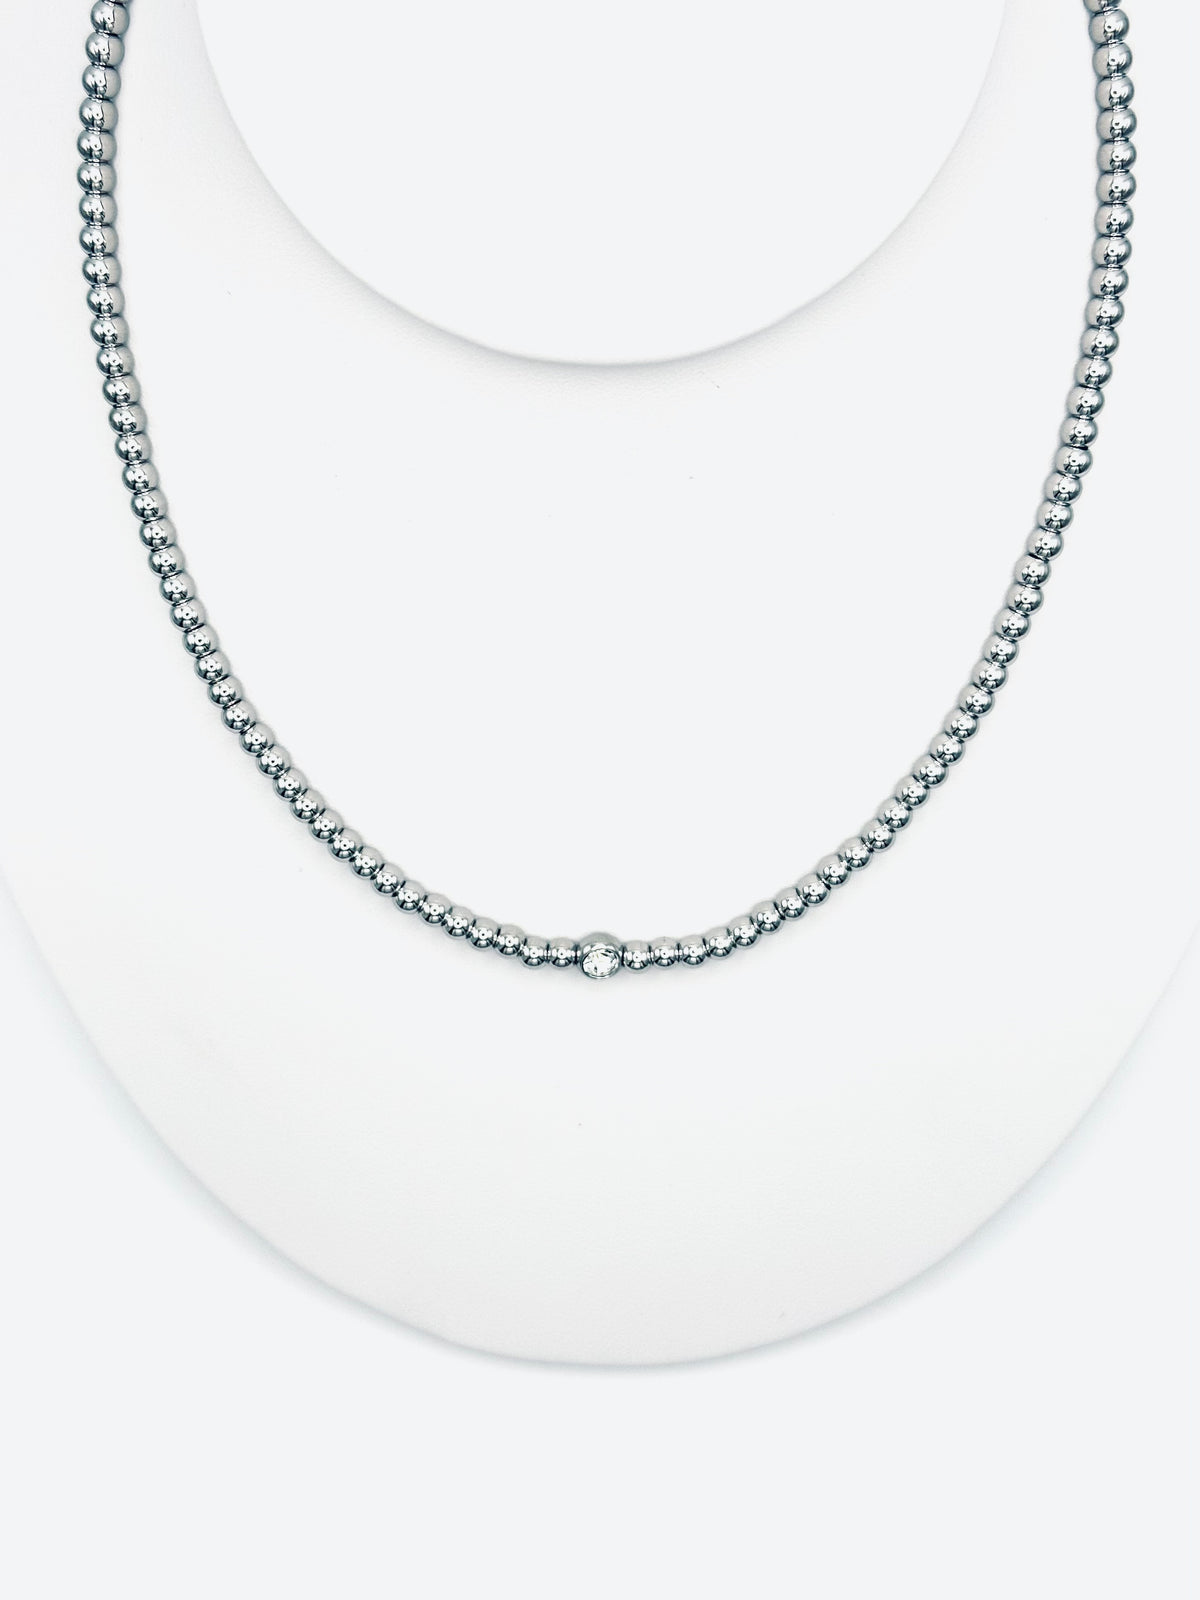 Beaded Radiance Ensemble Necklace - Silver